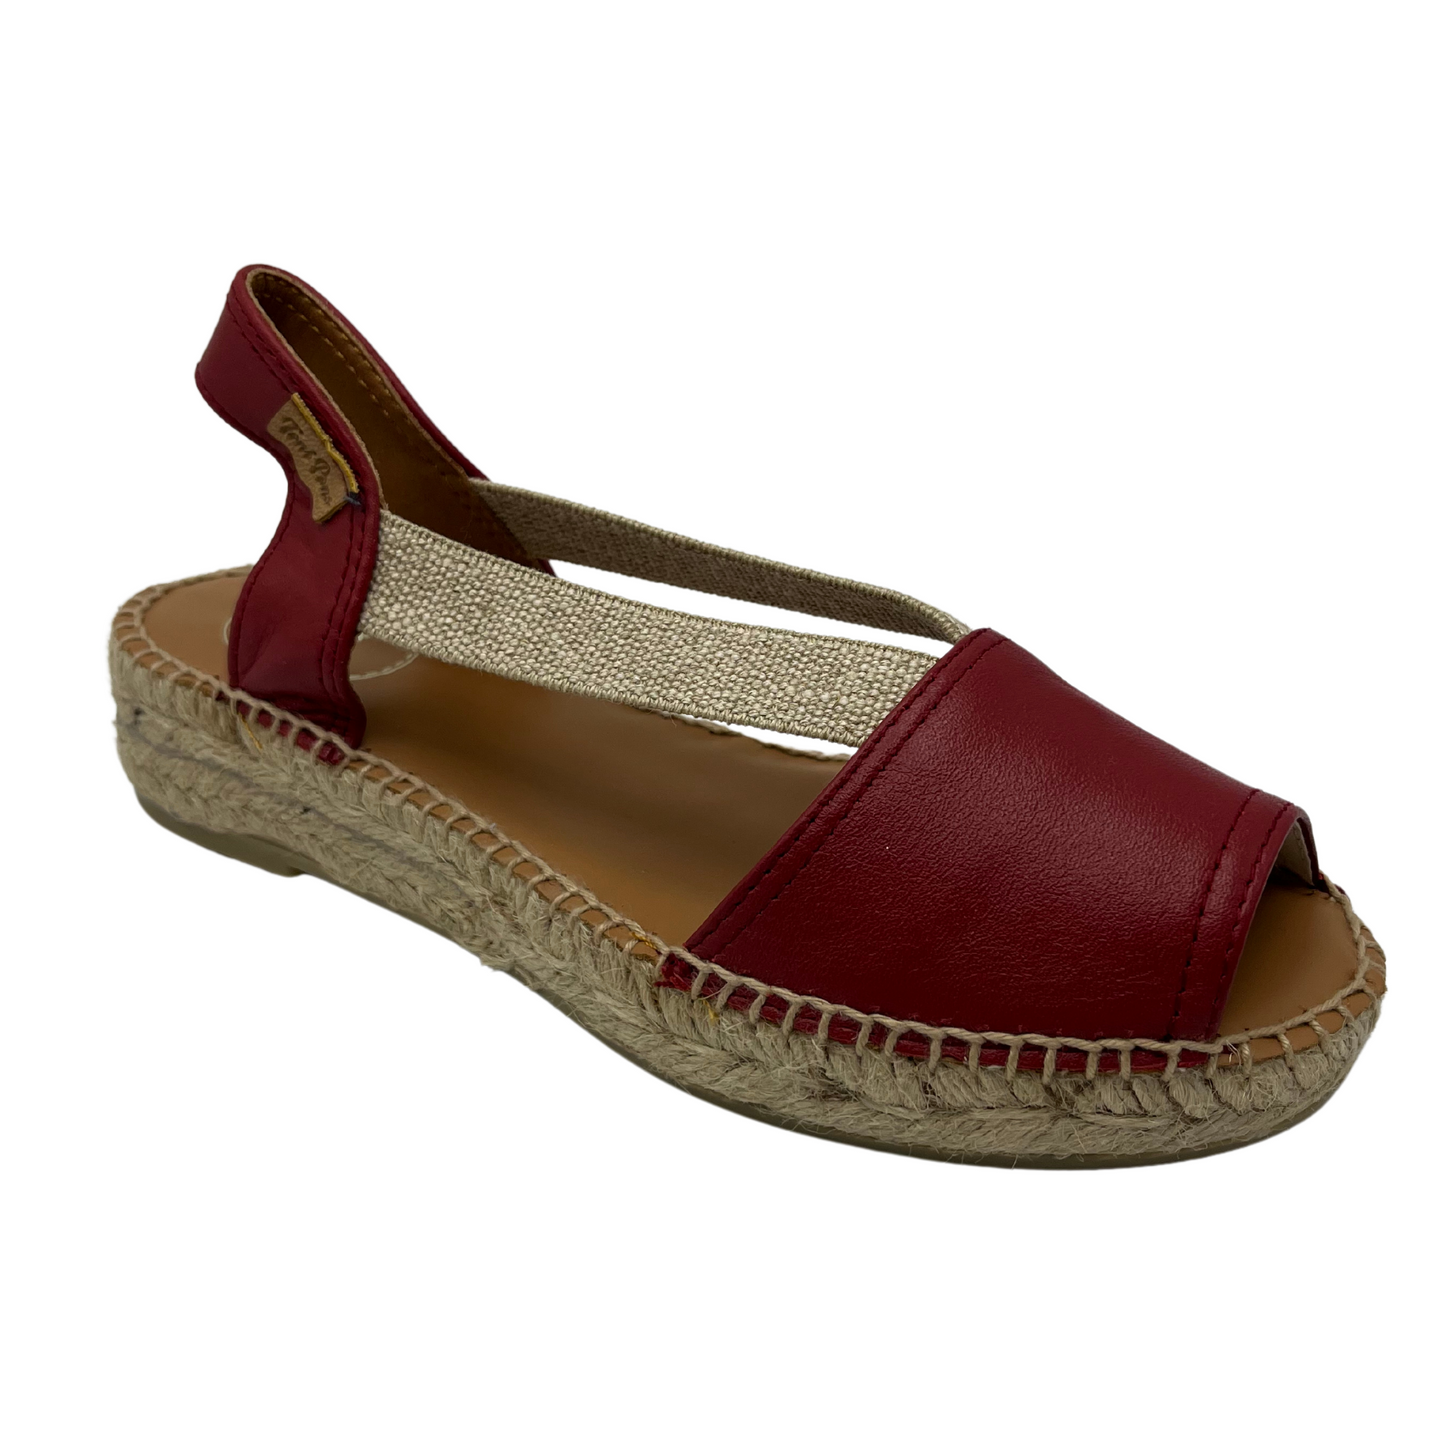 45 degree angled view of red leather sandal with rounded toe and brown lining